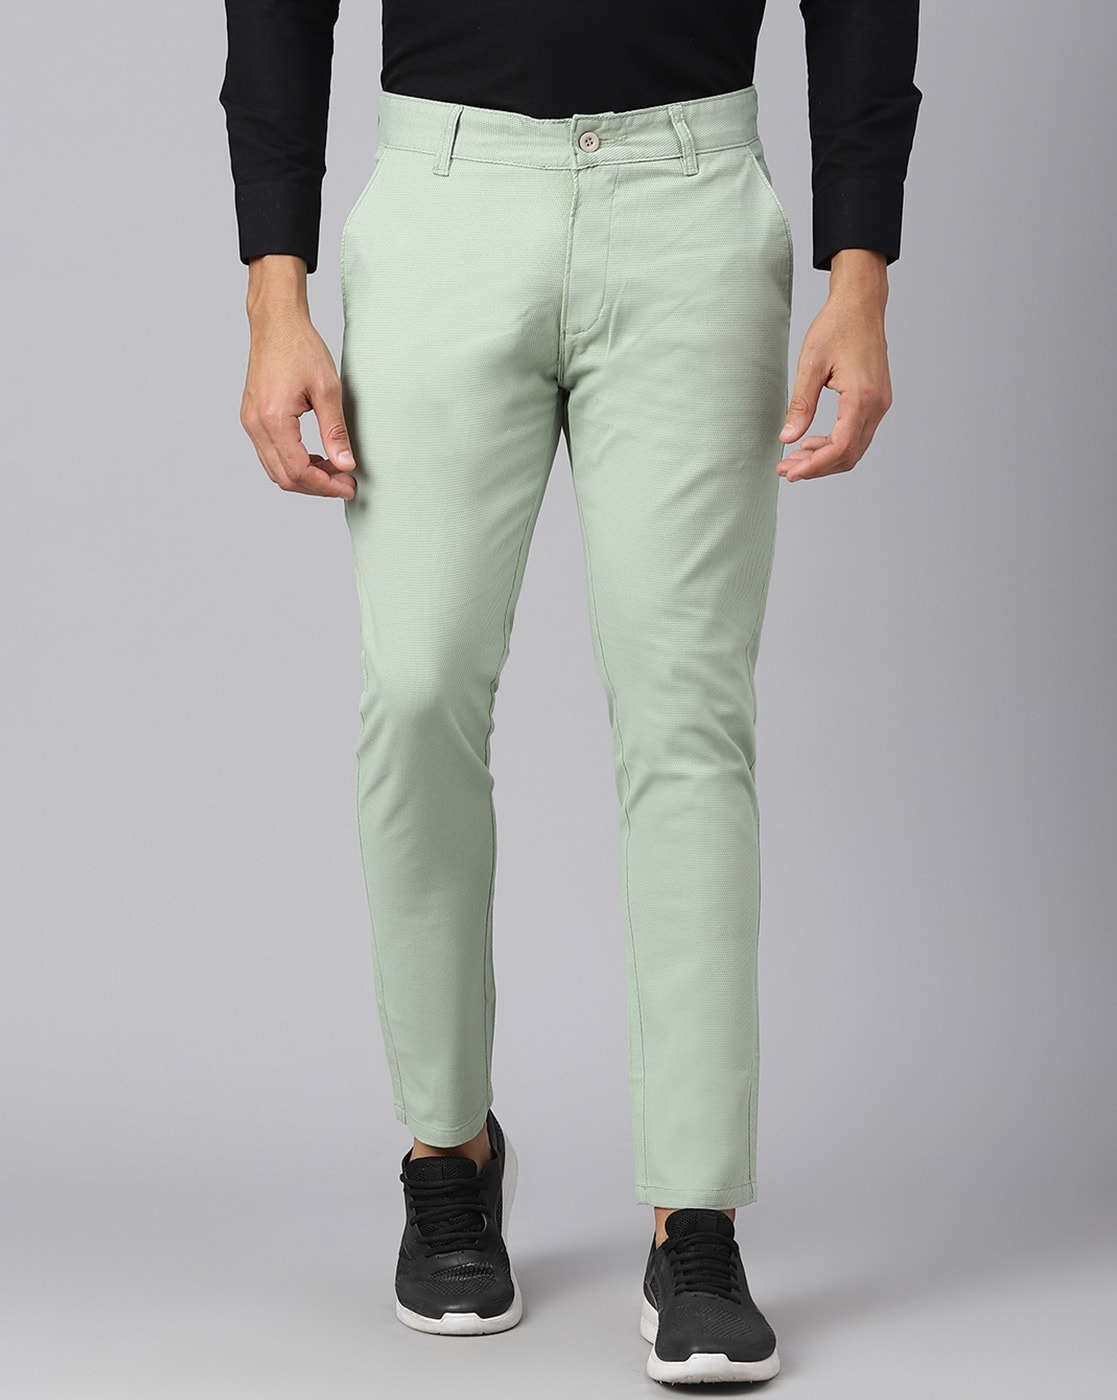 50 Different Colors Pants Combination Outfits | Men's Casual Wear Evergreen  Outfits Ideas | Fashion suits for men, Stylish mens outfits, Mens outfits